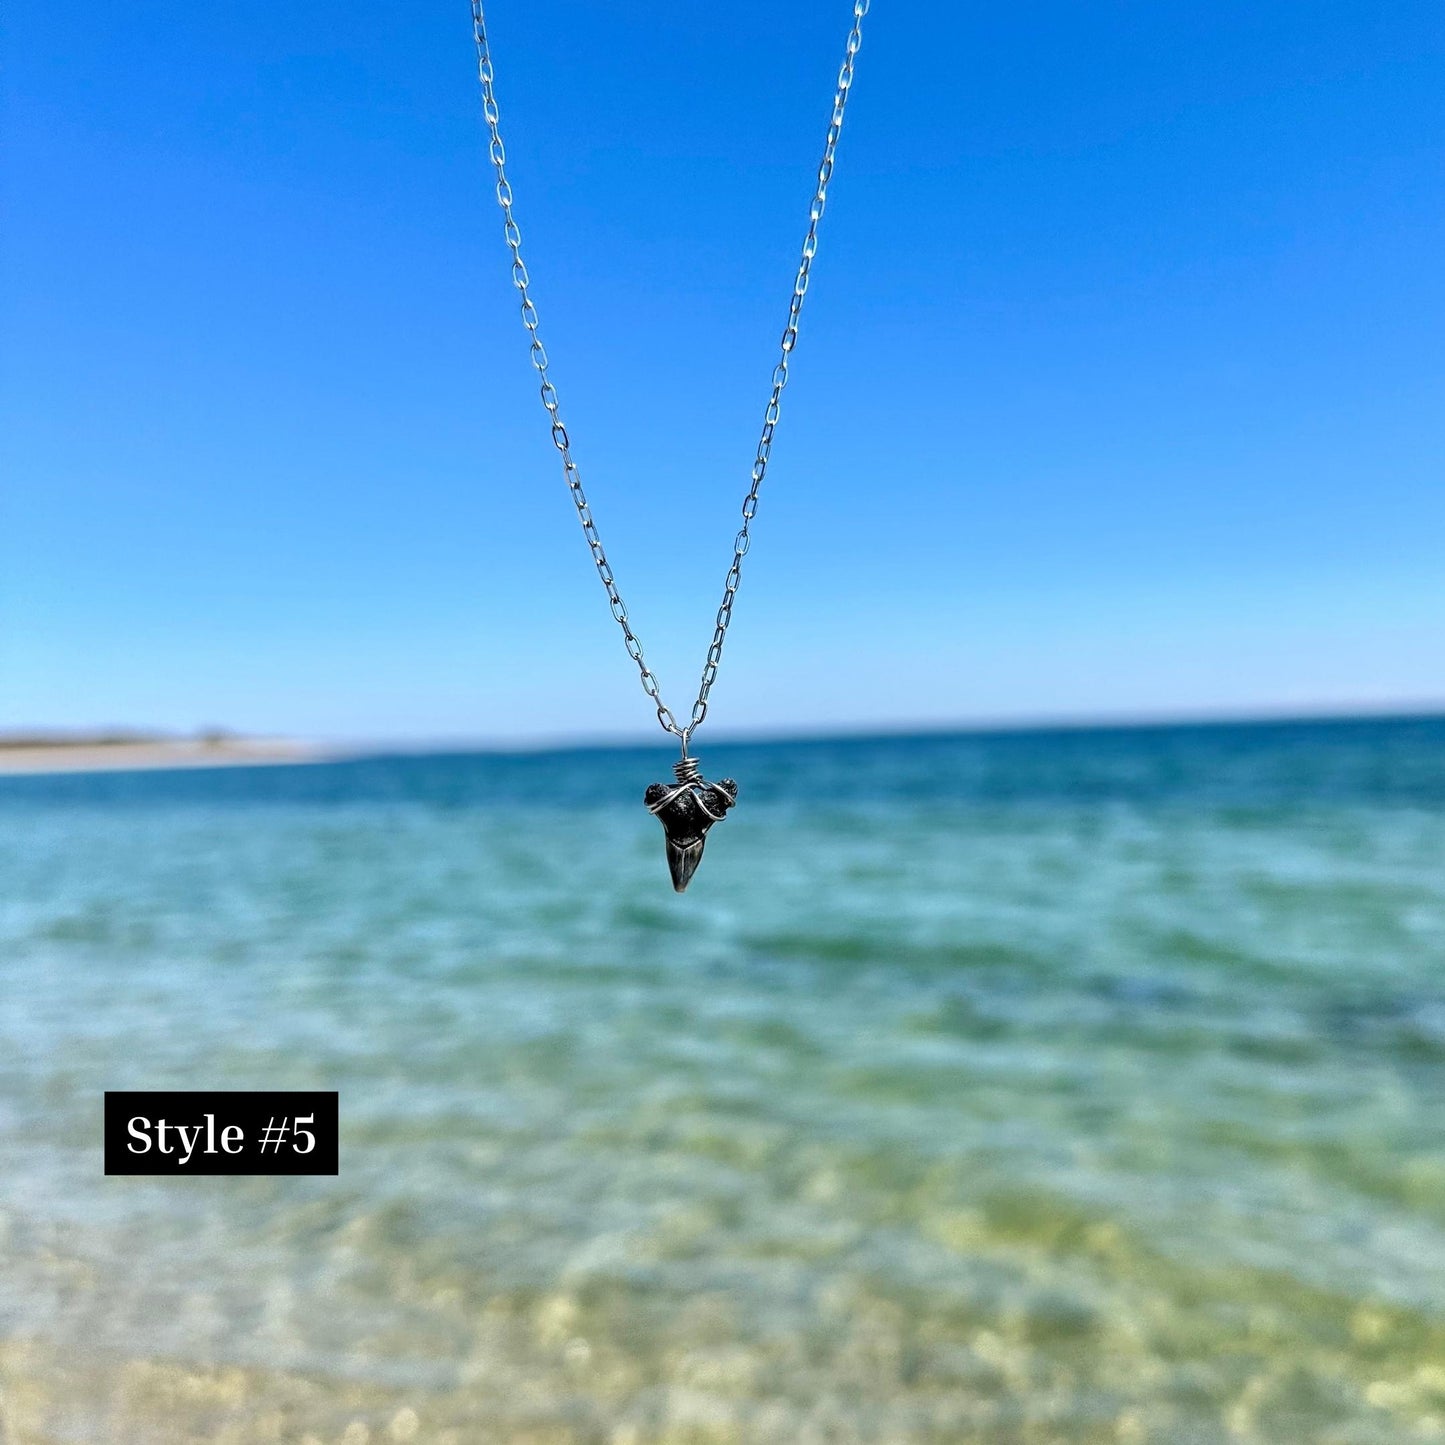 Juno Beach Fossilized Shark Tooth Necklace